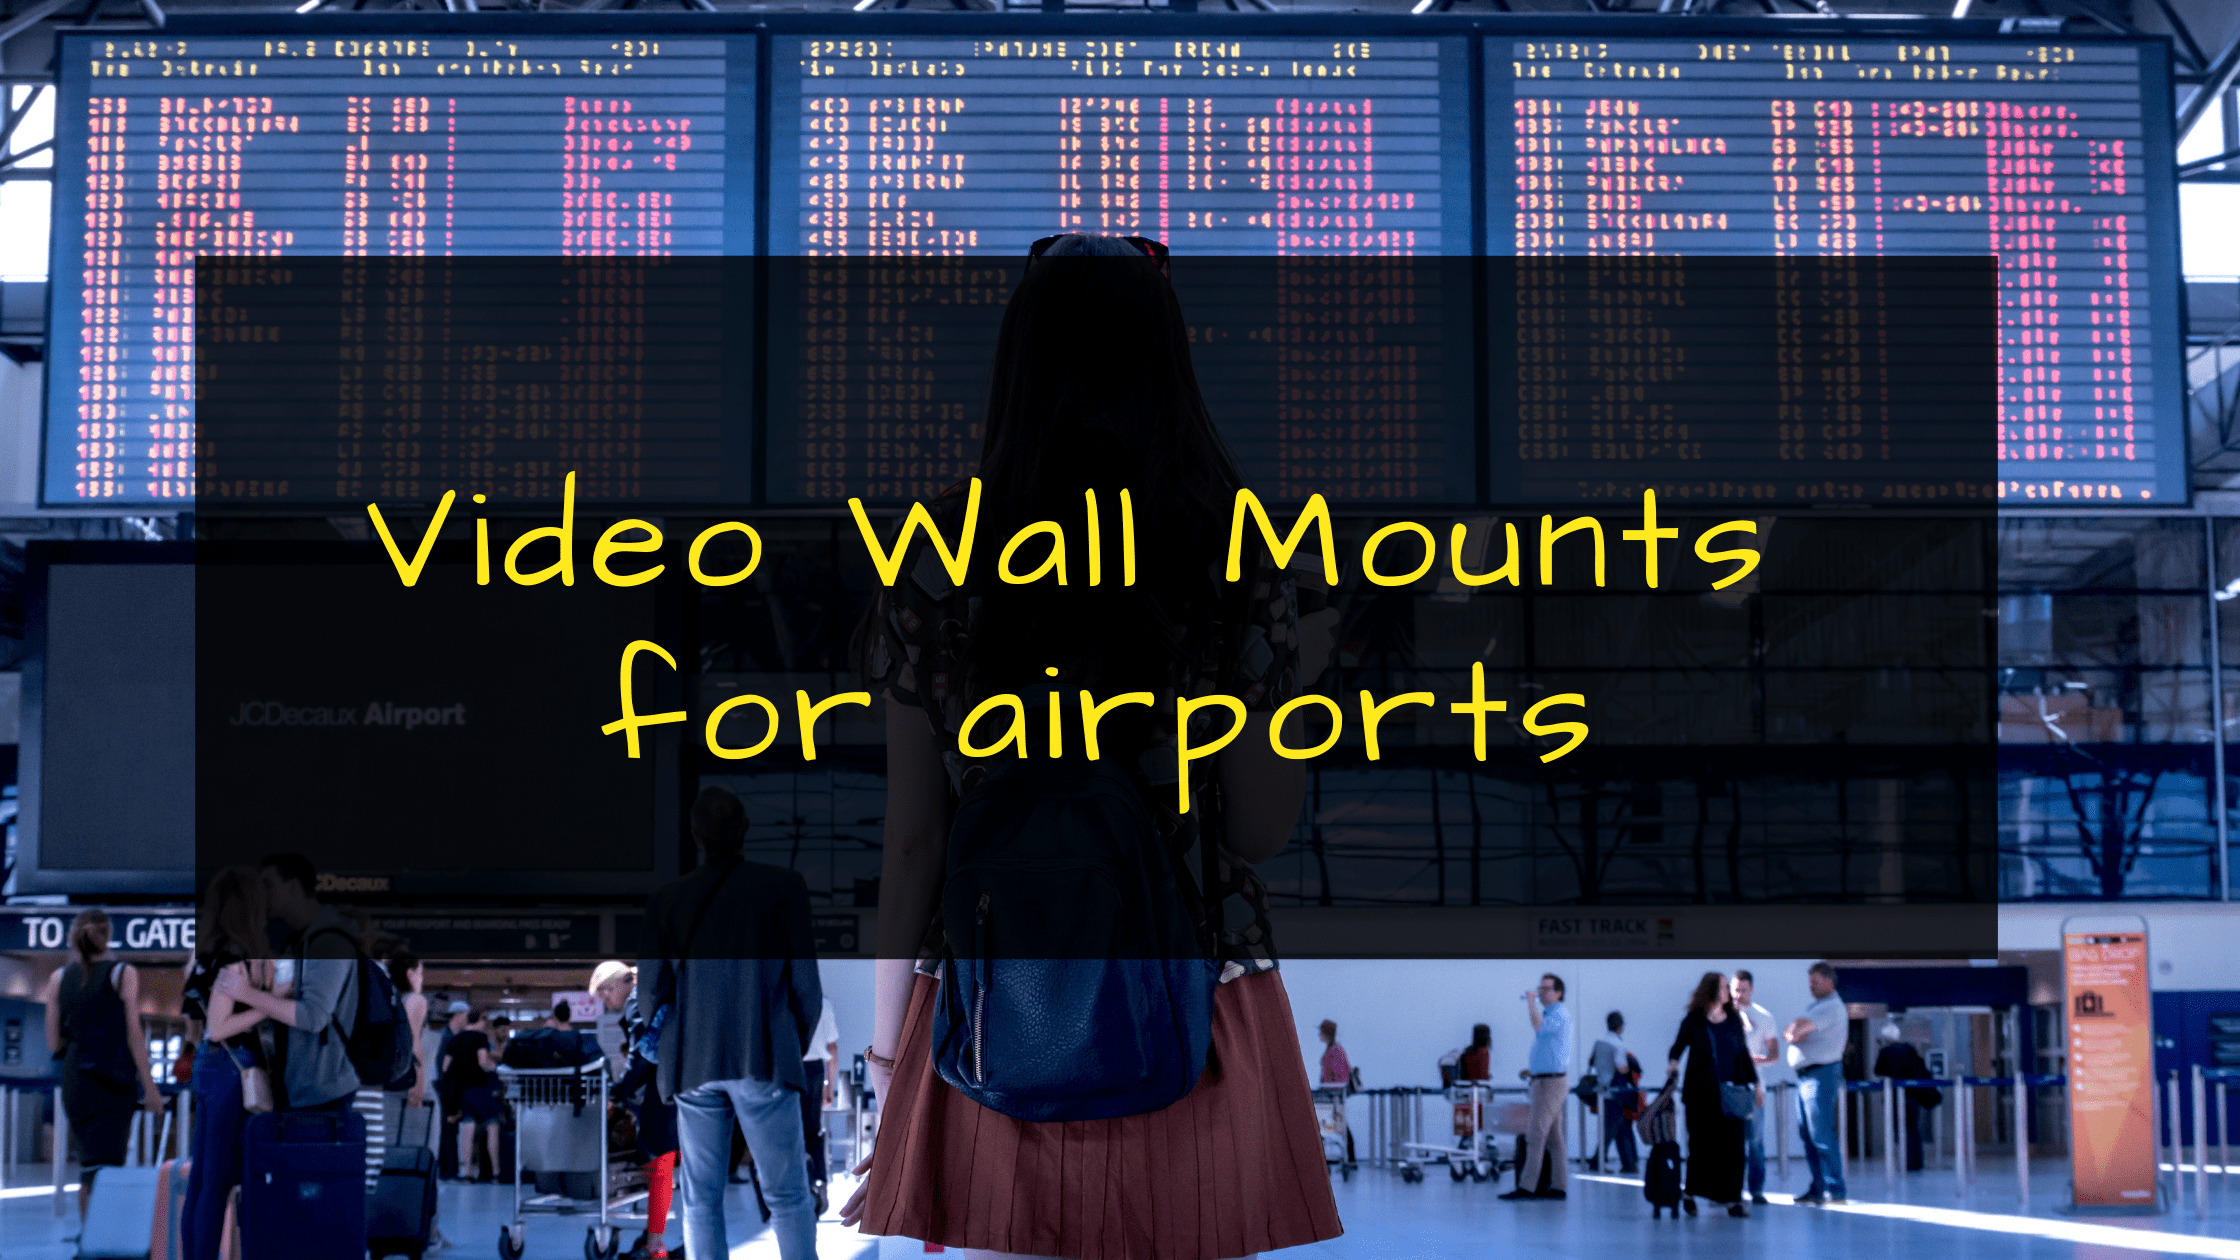 Video Wall Display - Digital Signage solutions